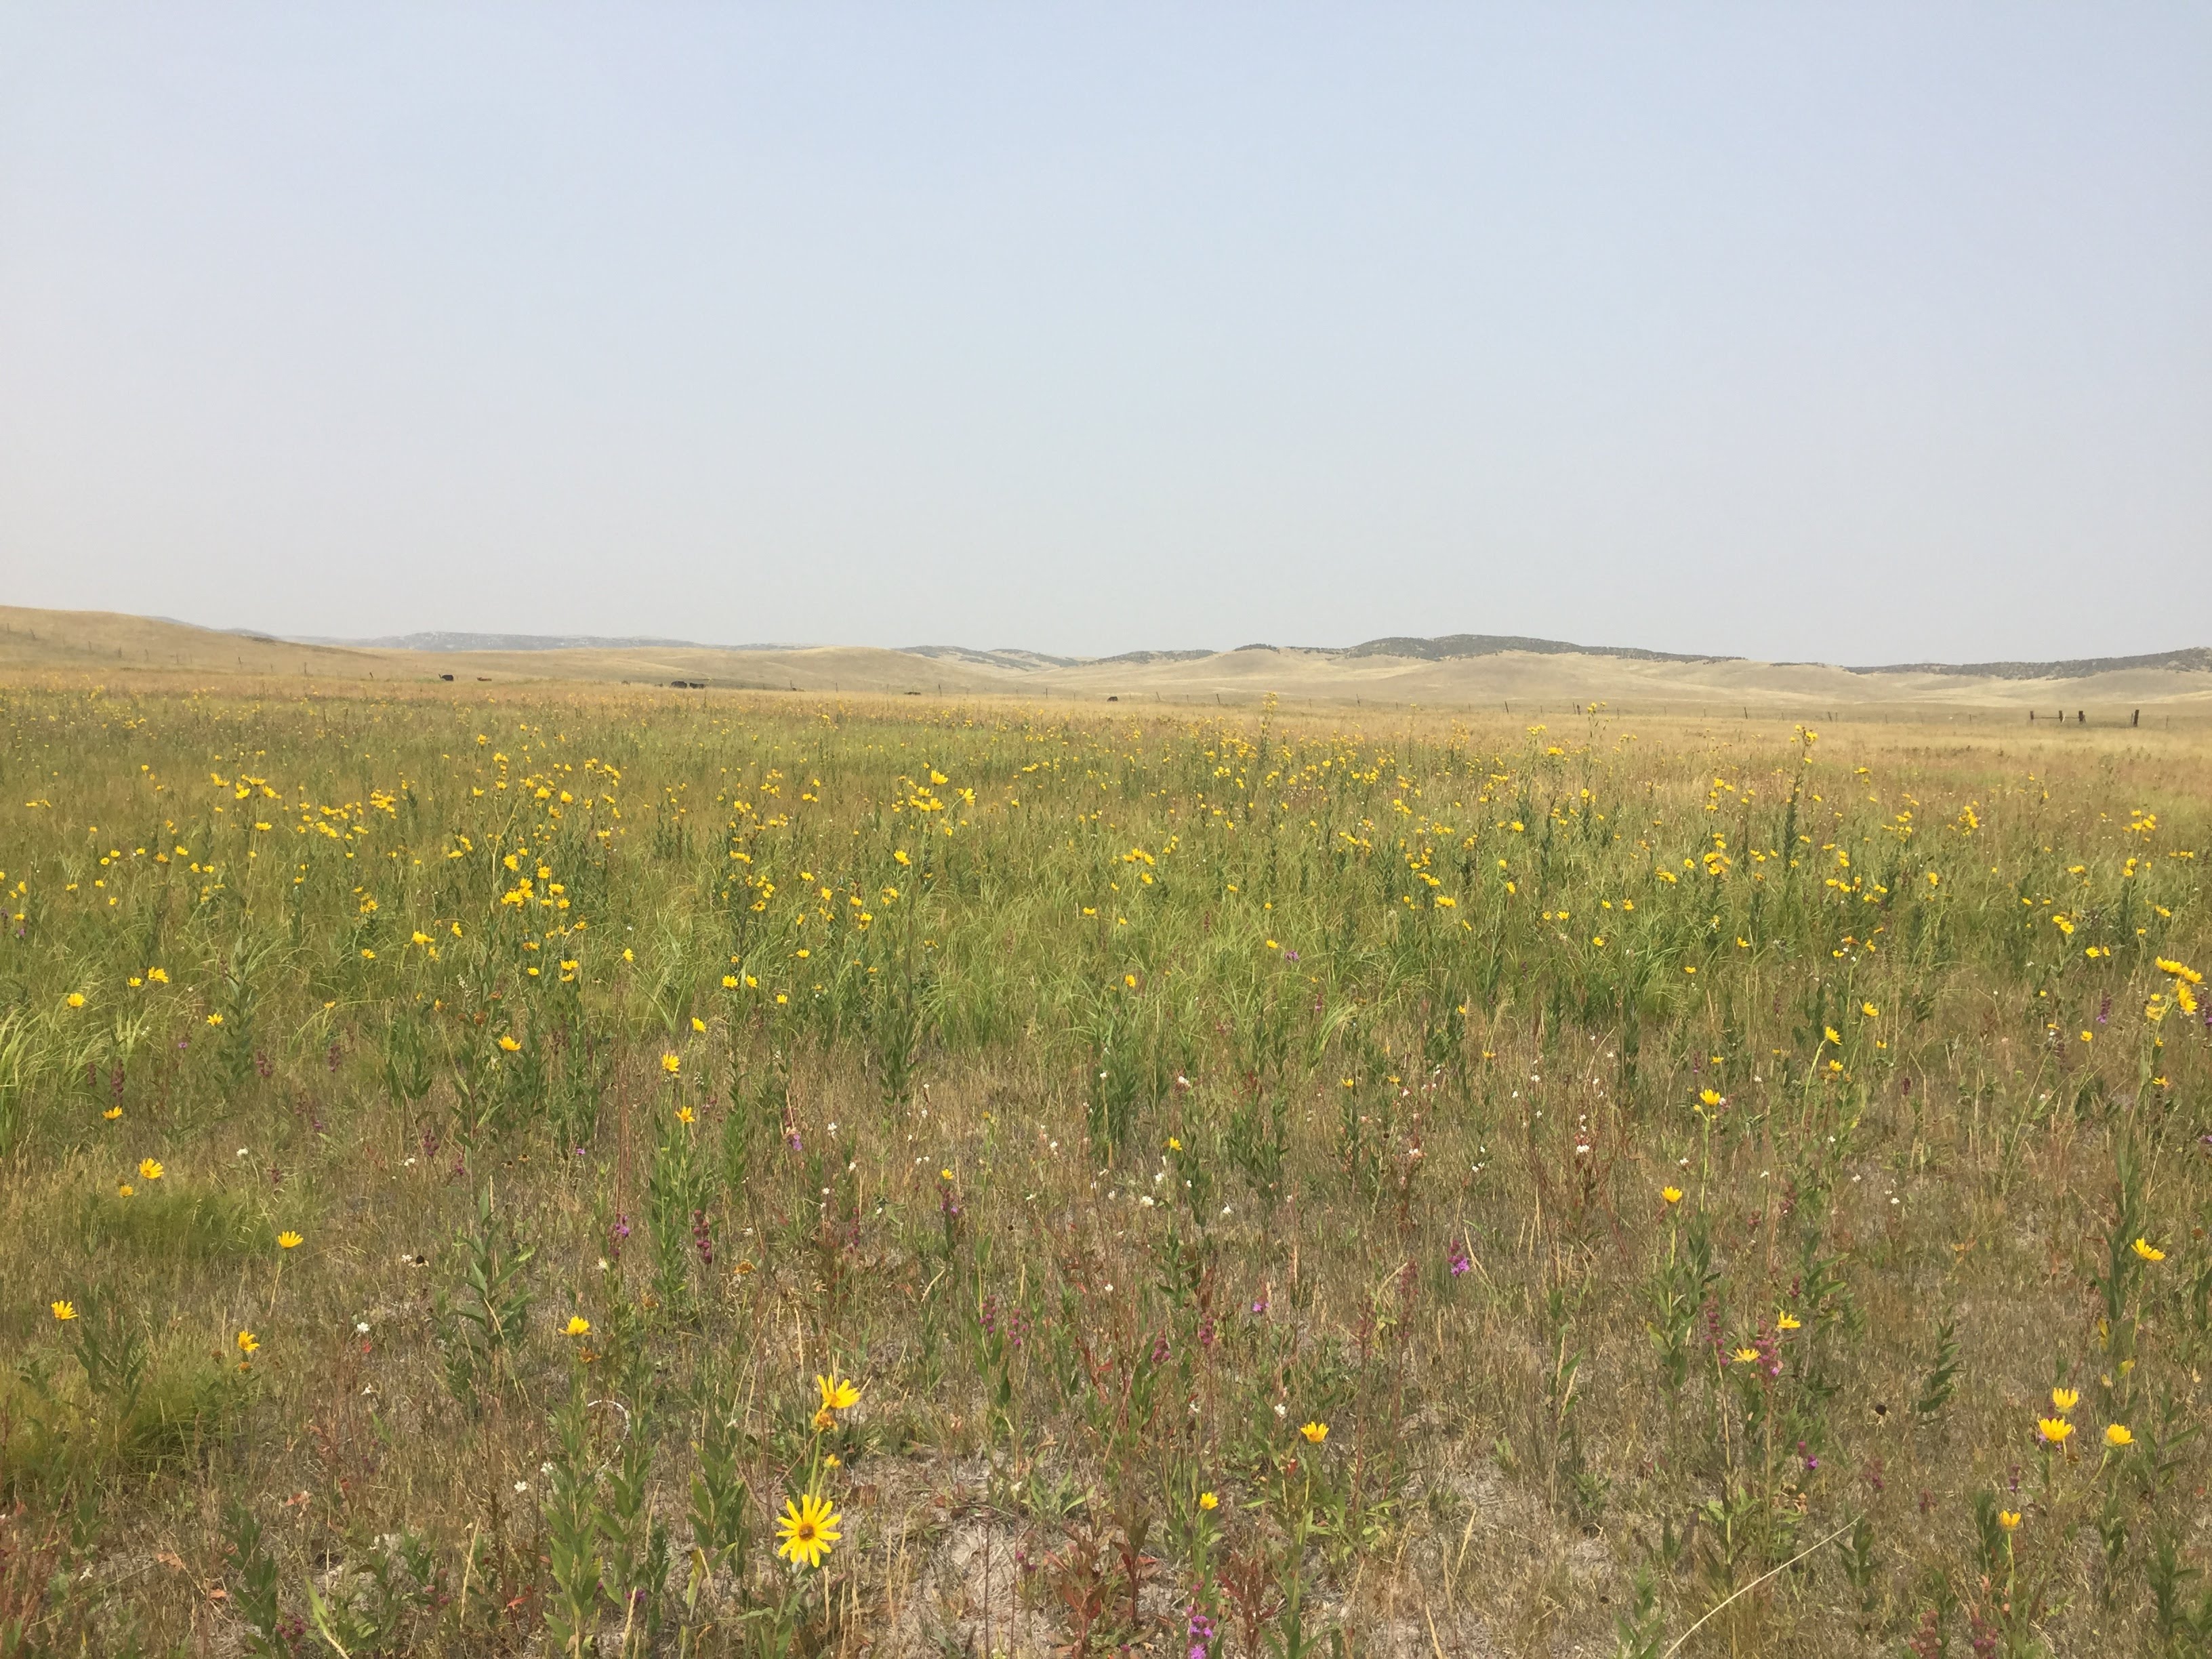 An image of a productive shortgrass steppe meadow